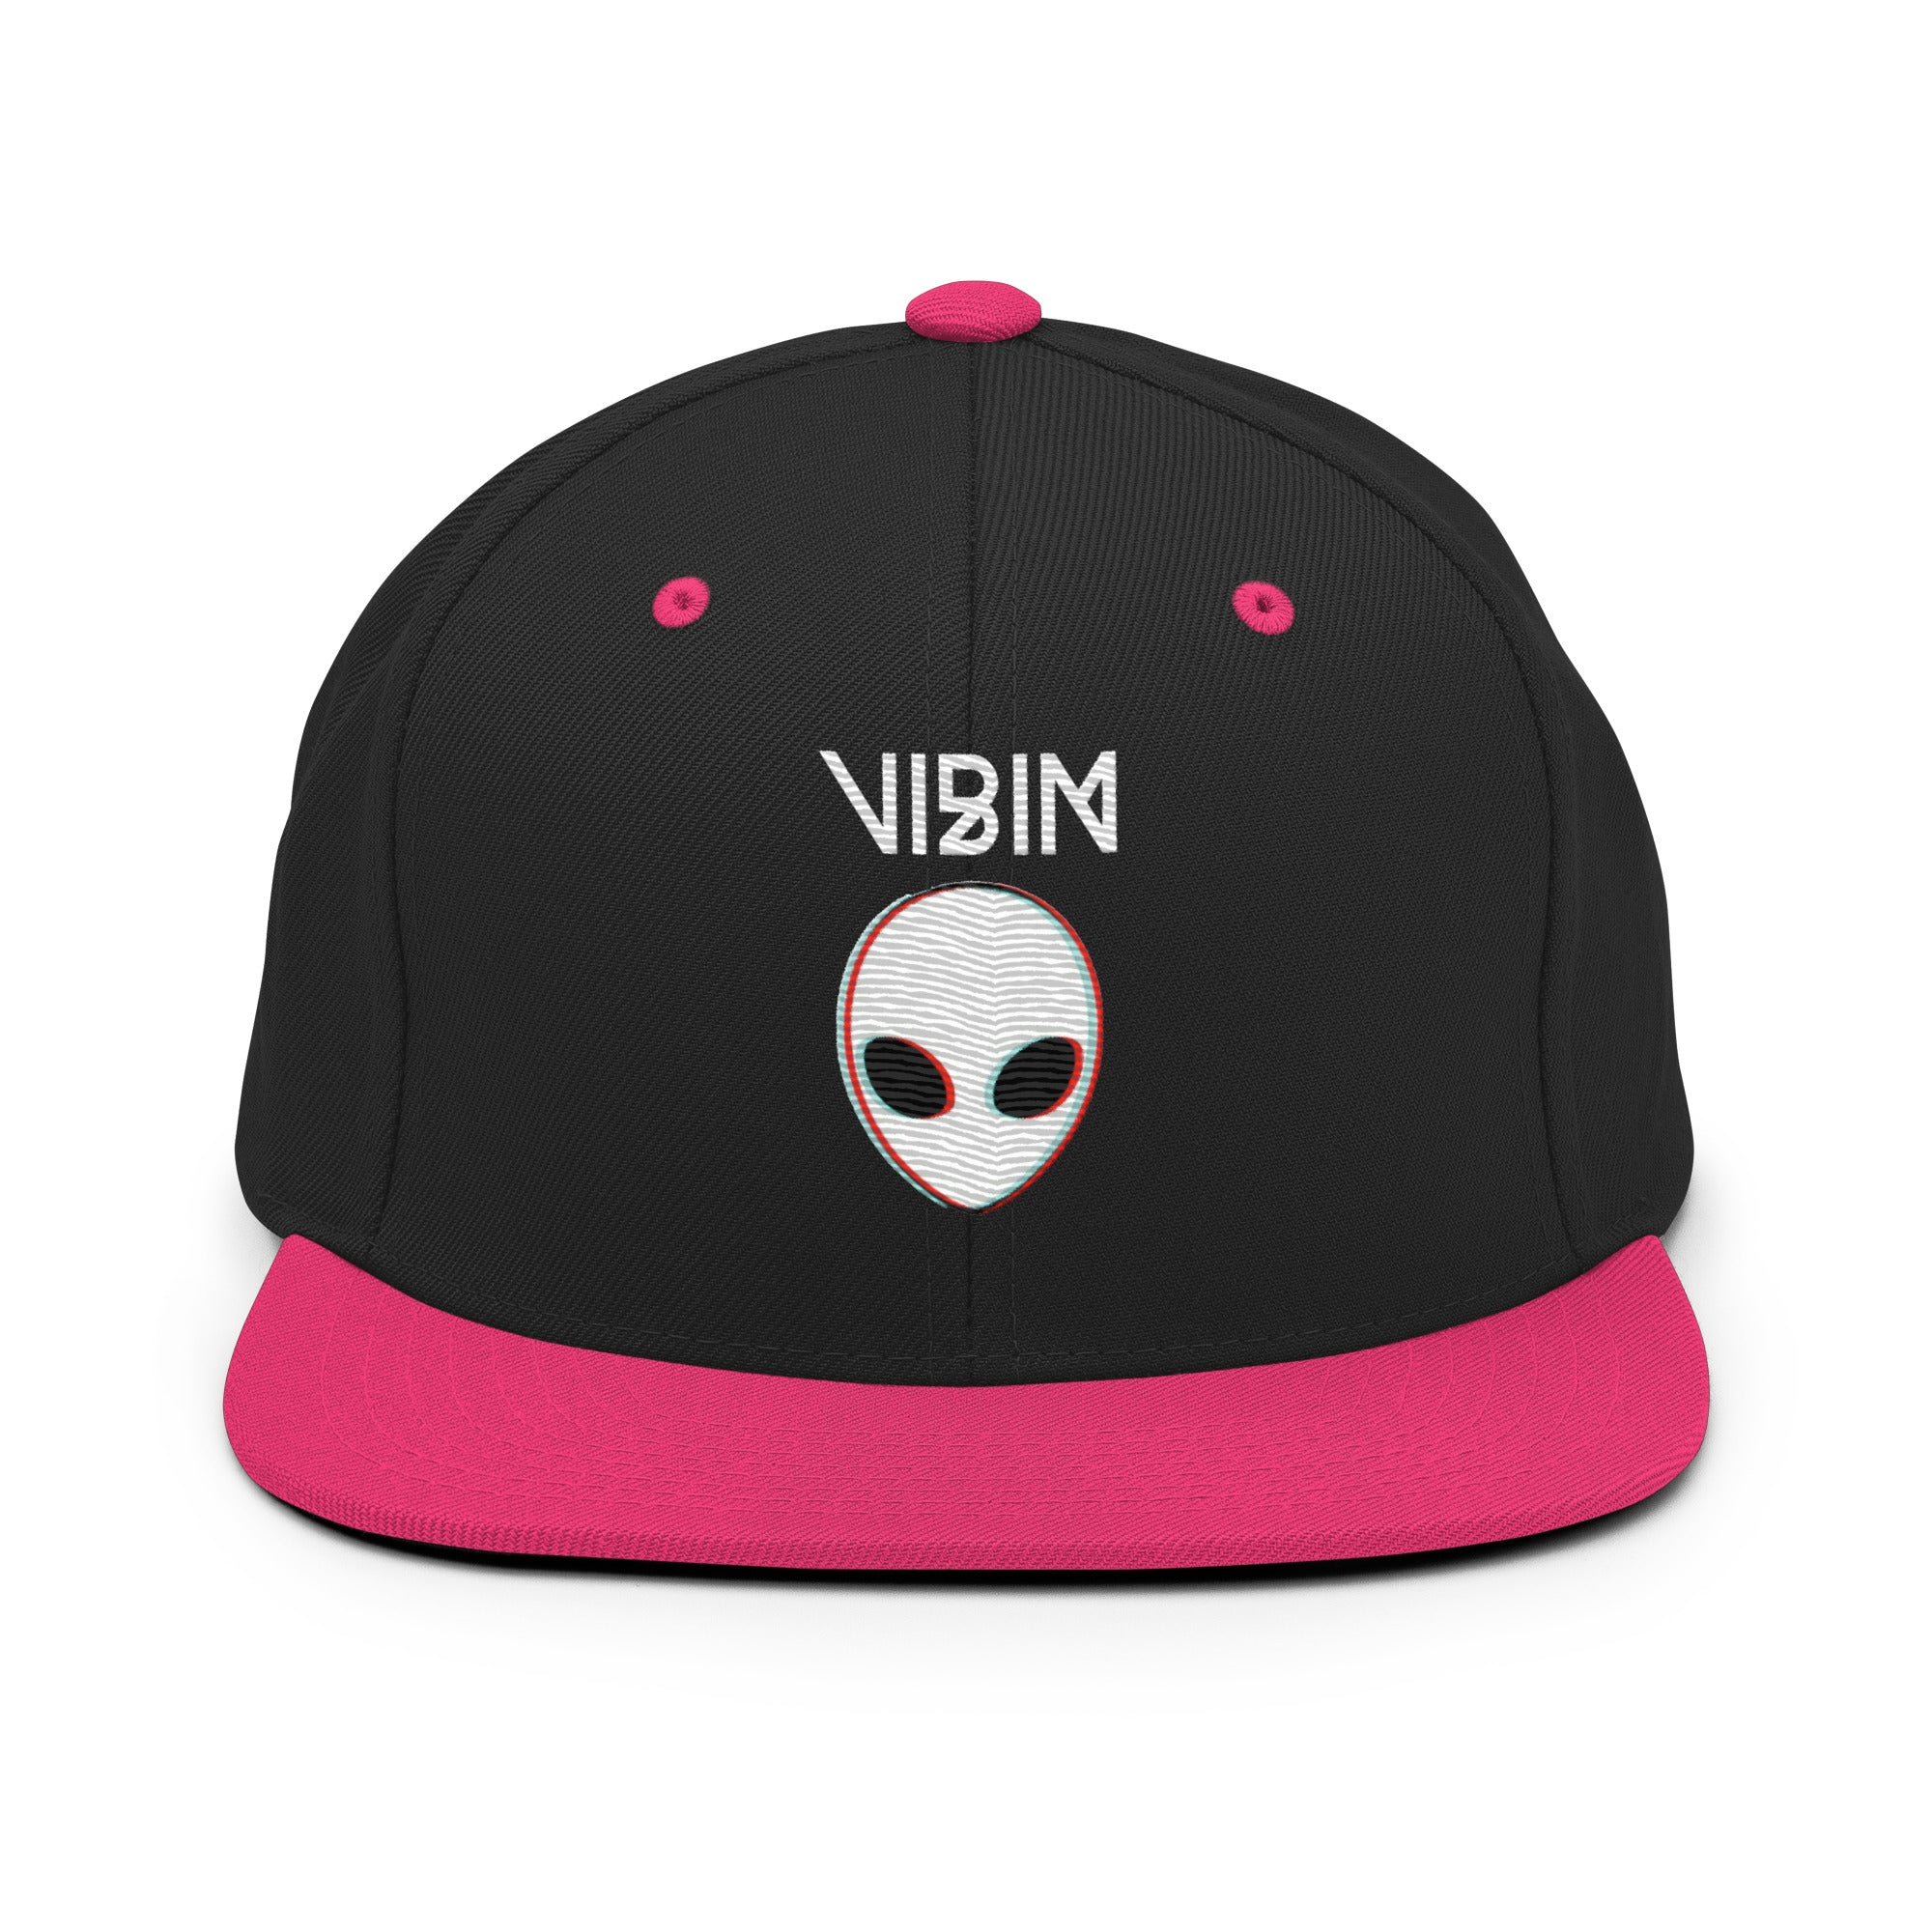 Elevate your vibe with our ALIEN VIBES SNAPBACK HAT. With a vibing alien design, this snapback is perfect for any rave or festival. Spread the good vibes and stand out from the crowd. Made for those who dare to be different.